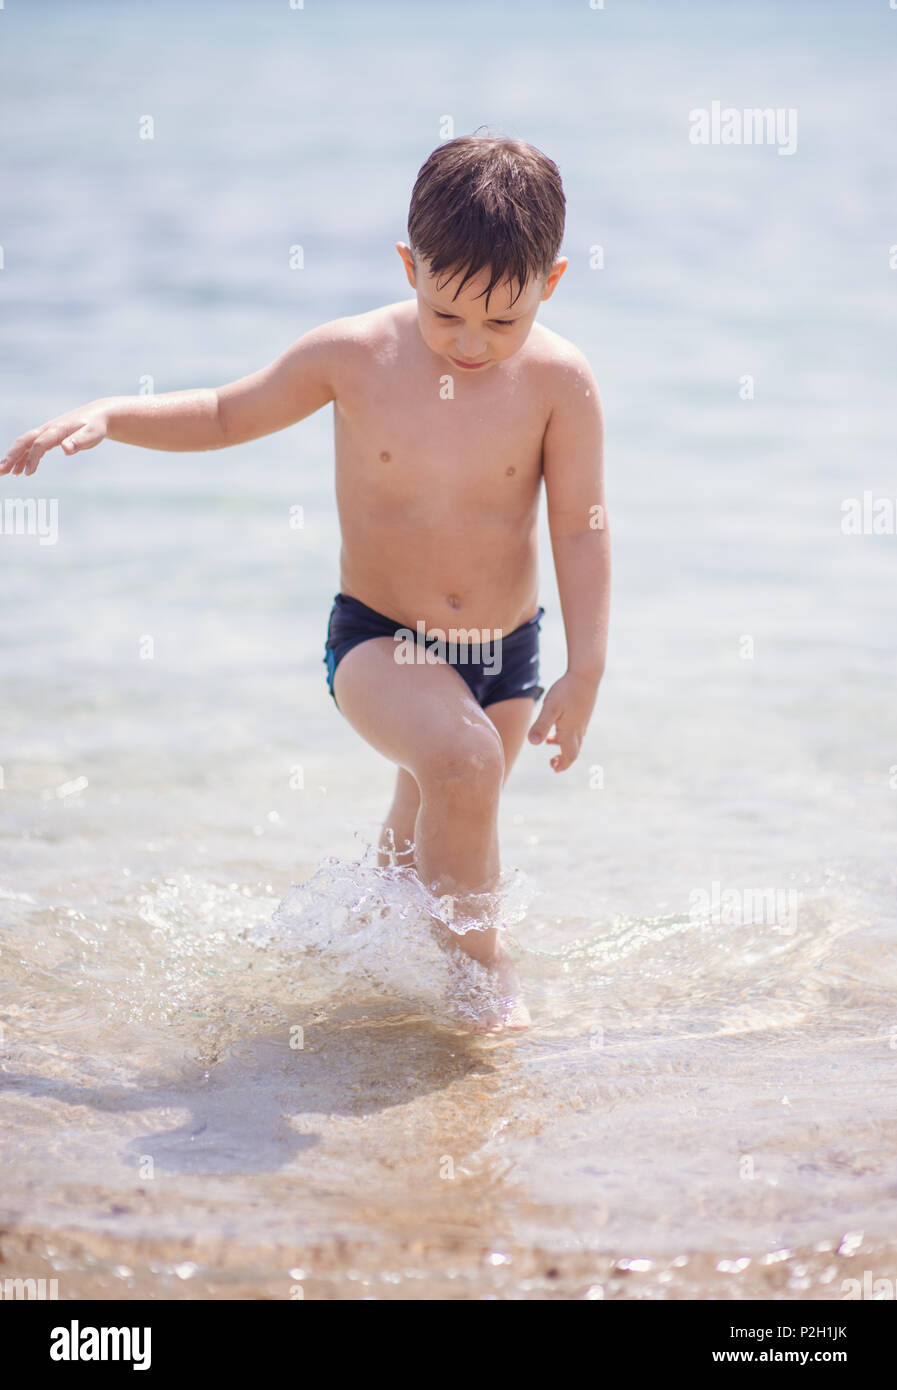 Adorable boy that wears black swimsuit is standing in the shallow water on  the beach Stock Photo - Alamy